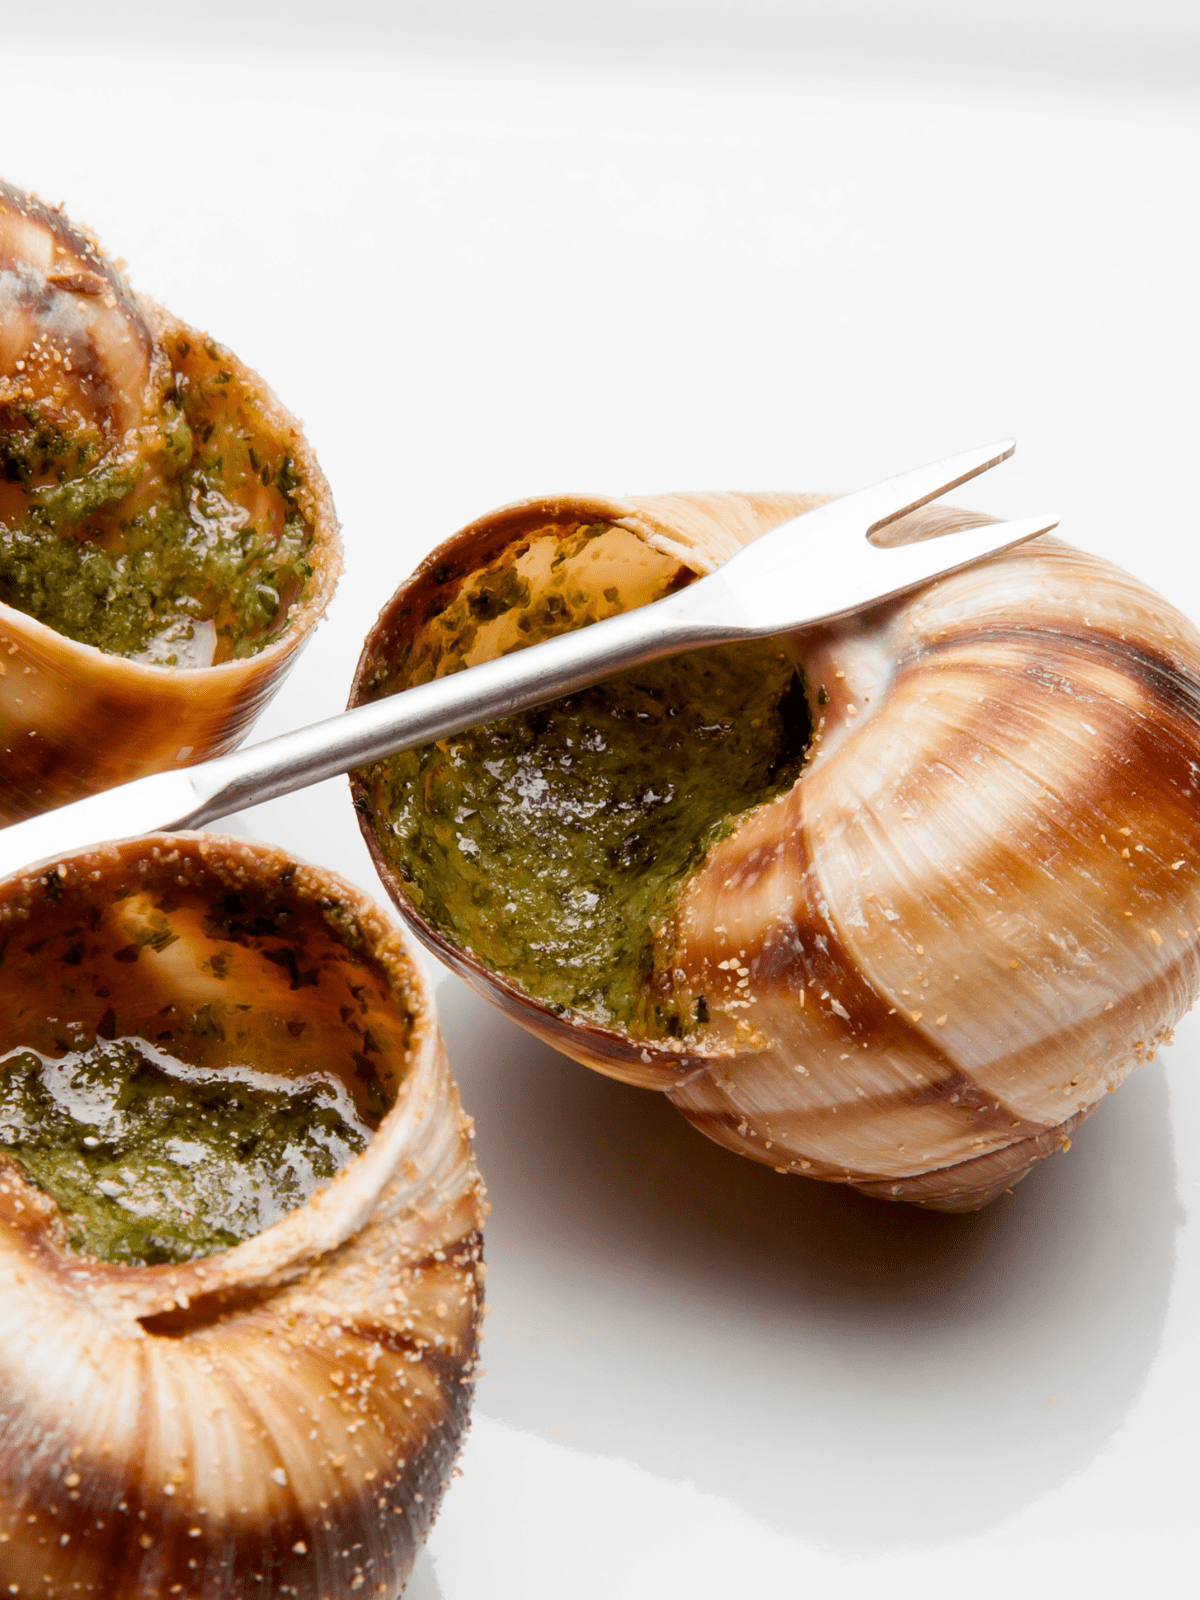 Cooked snails with an escargot fork.